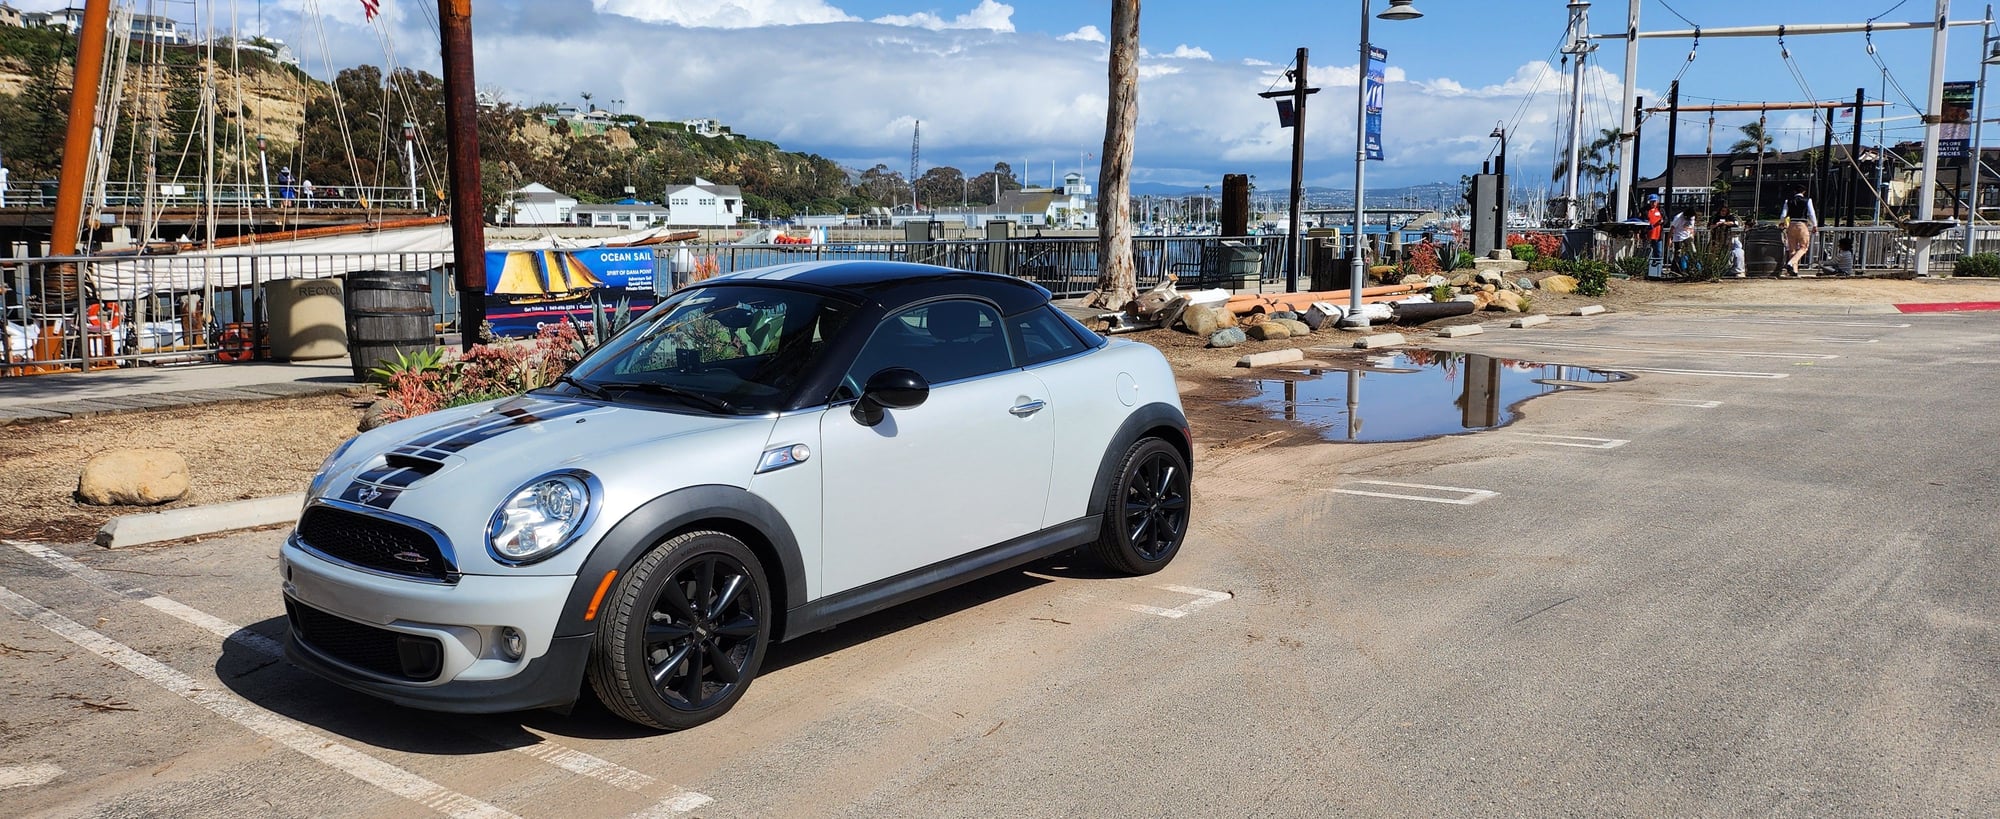 2015 Mini R58: Coupe - 2015 R58 "S" with Factory JCW Tuning and Exhaust kit. - Used - San Juan Capistrano, CA 92675, United States